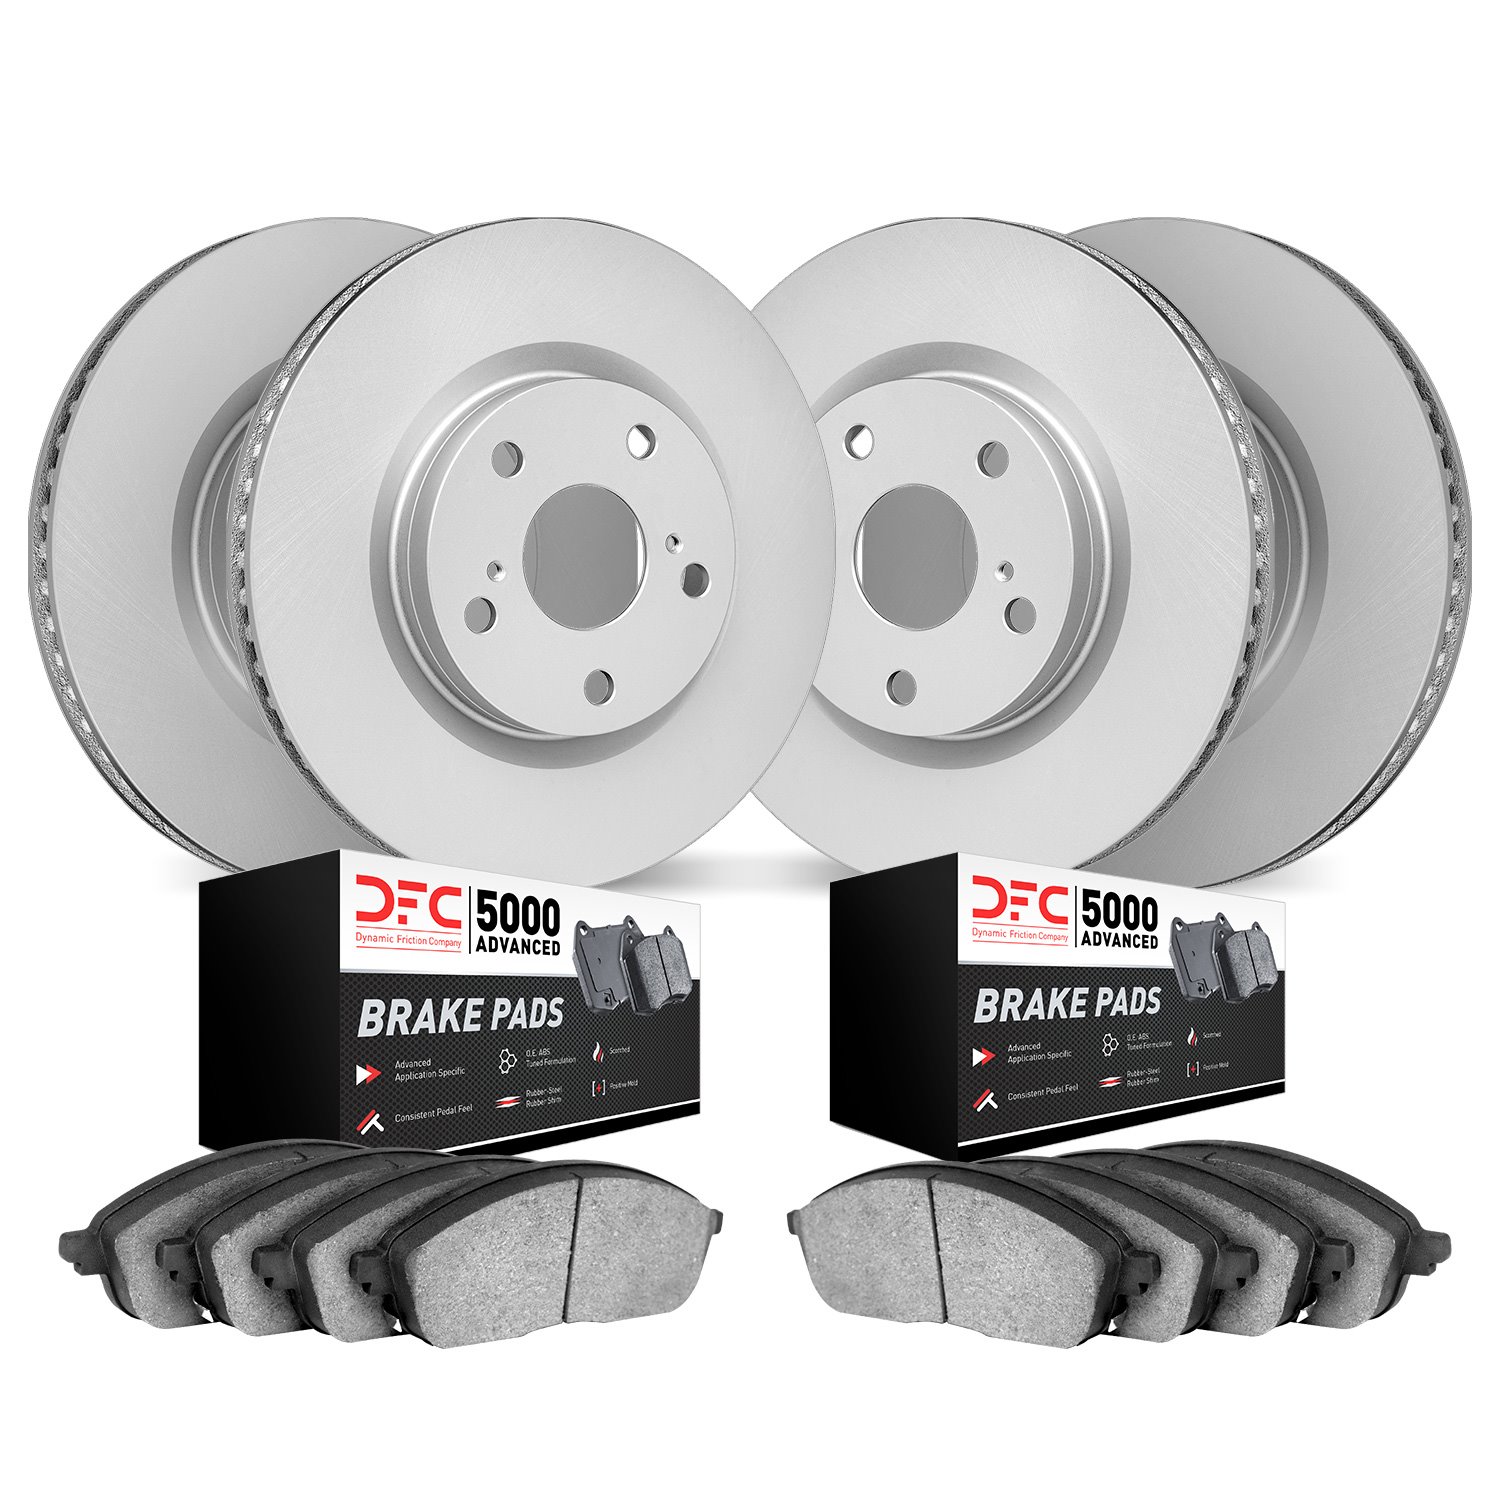 4504-63002 Geospec Brake Rotors w/5000 Advanced Brake Pads Kit, 2018-2019 Mercedes-Benz, Position: Front and Rear